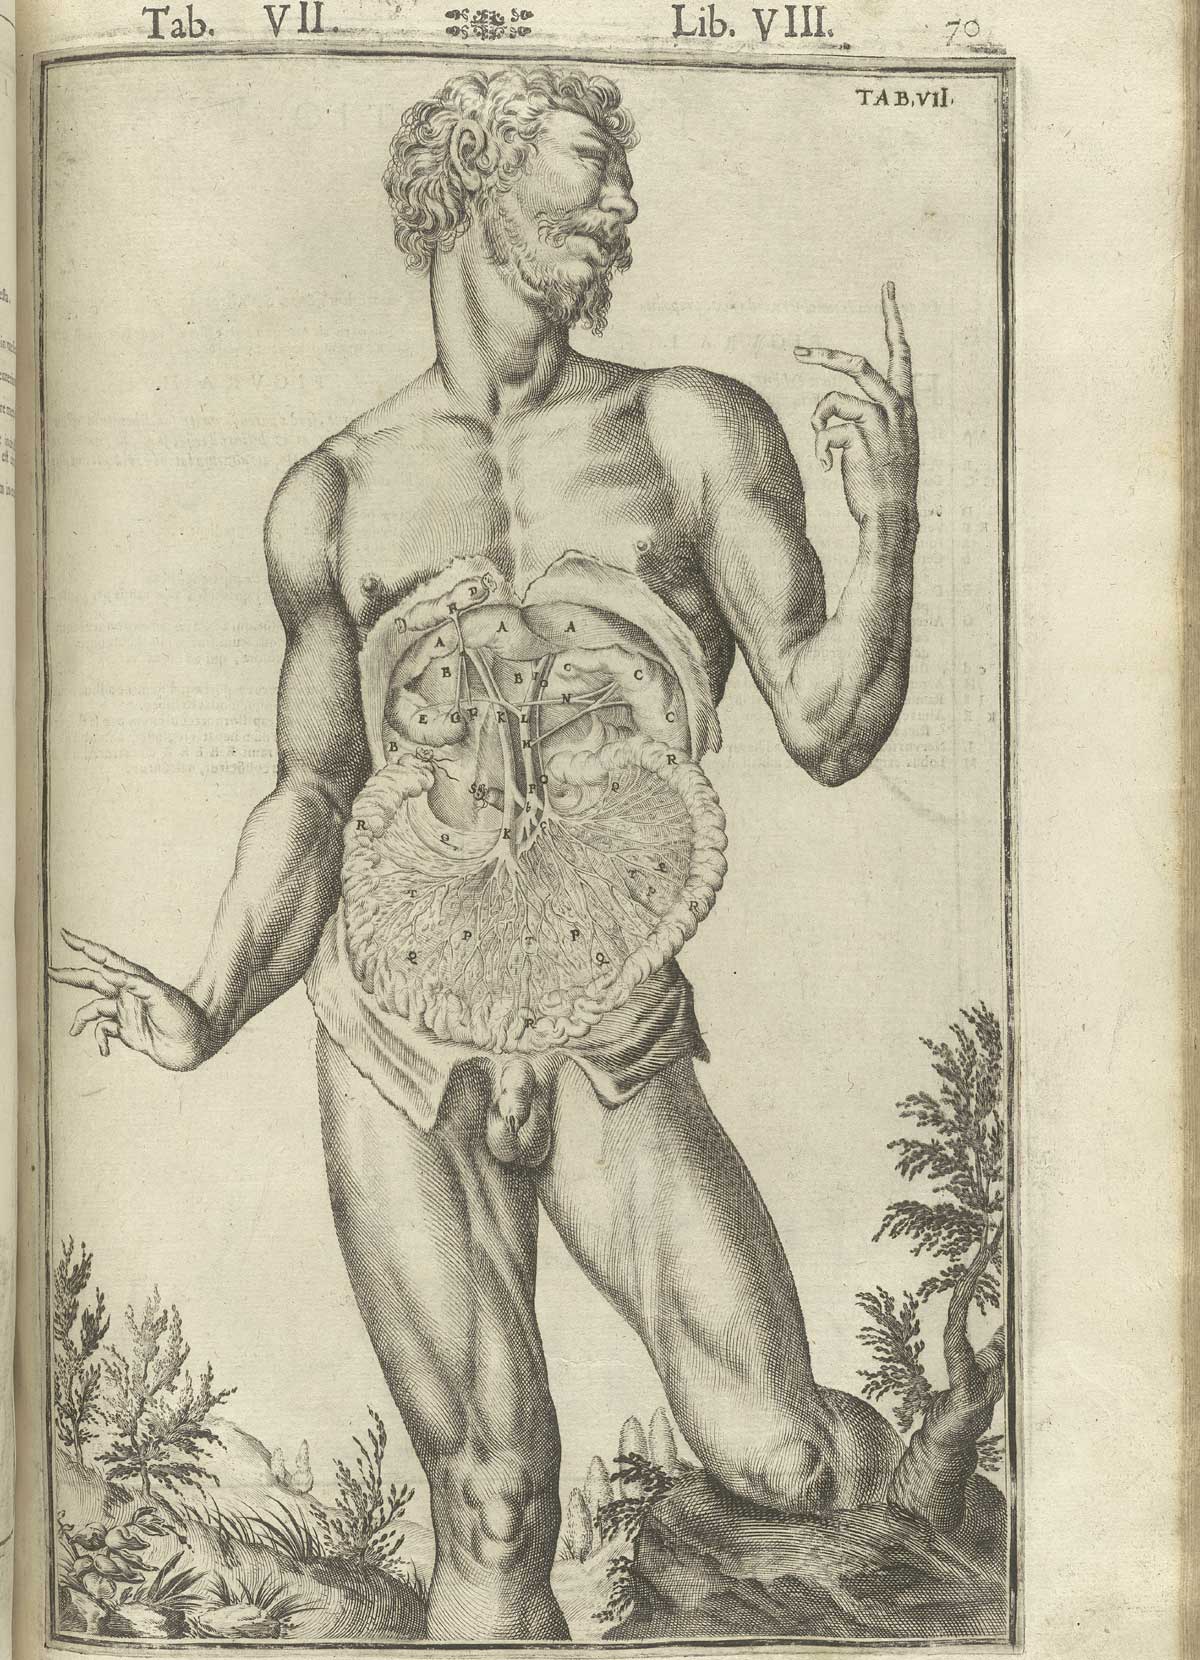 Engraving showing a facing view of a standing bearded nude male anatomical figure with face turned to the right in a pastoral setting, with his abdomen cut open showing the peritoneum, intestines, liver, and associated circulatory system, with left hand pointing skyward exposed in detail; from Adriaan van de Spiegel and Giulio Cassieri’s De humani corporis fabrica libri decem, Venice, 1627, NLM call no. WZ 250 S755dh 1627.